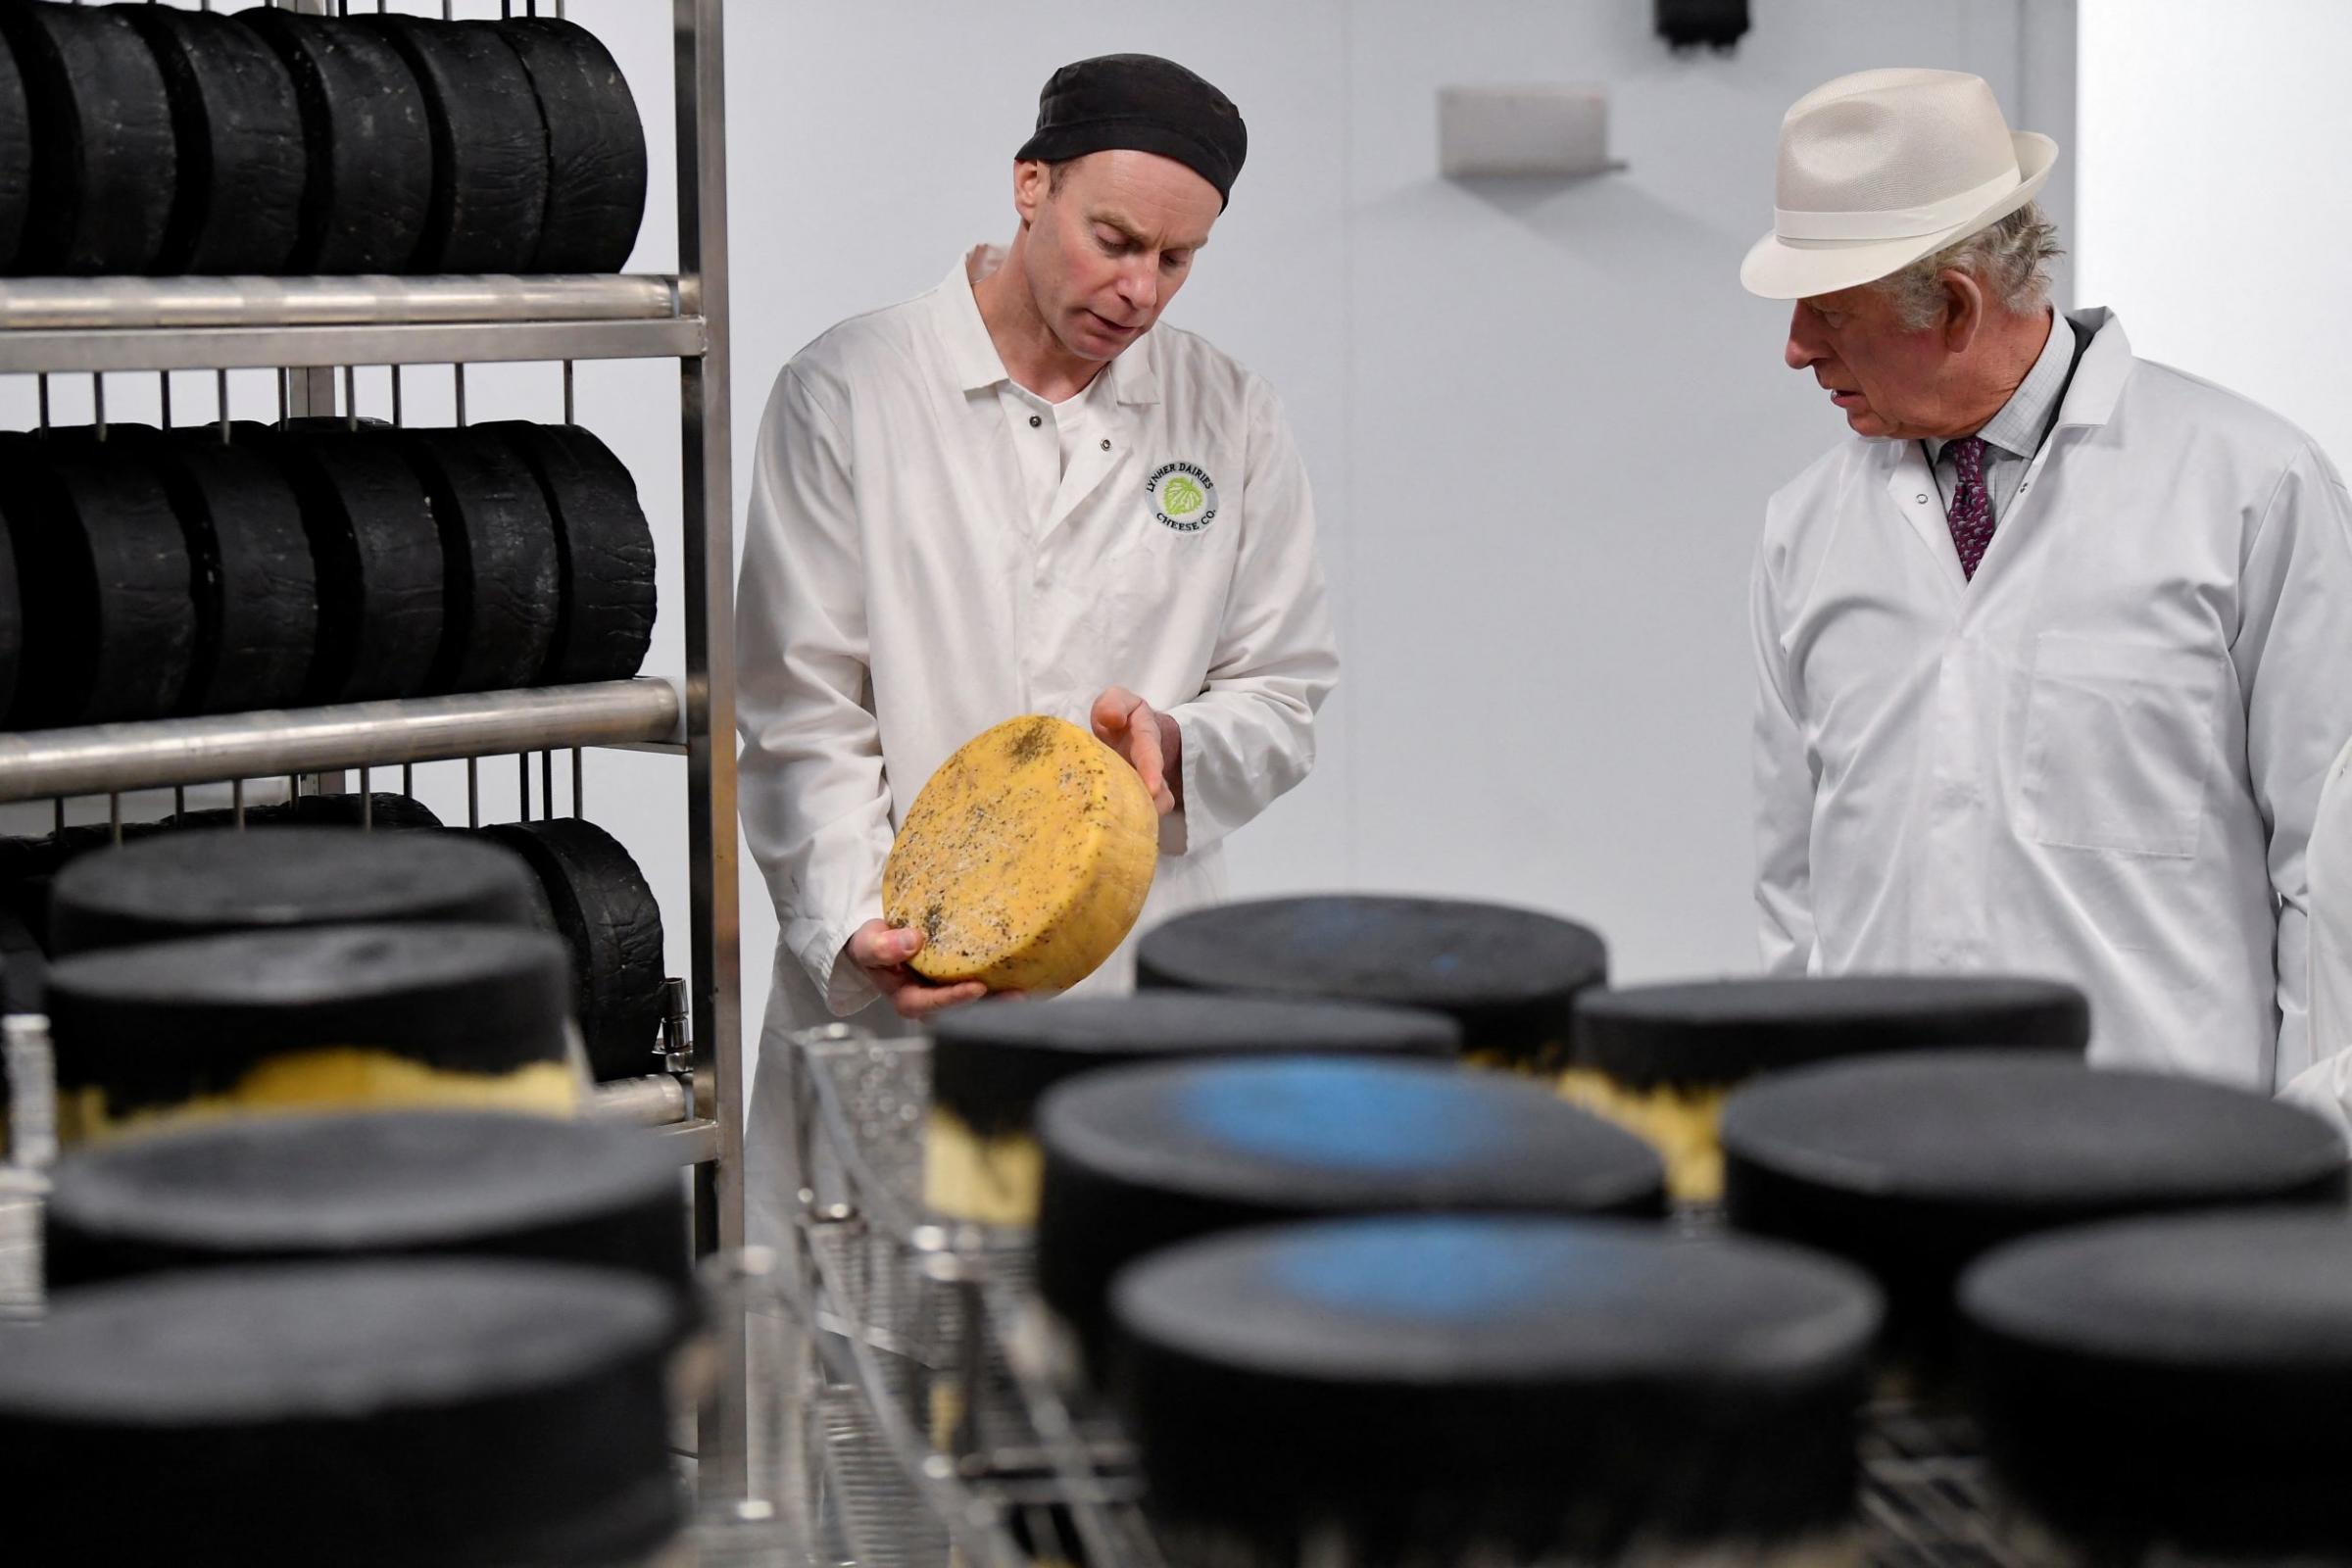 Cheese maker Leighton Moyles shows the Prince of Wales a sample of Kern cheese in the resting room Picture: PA Wire